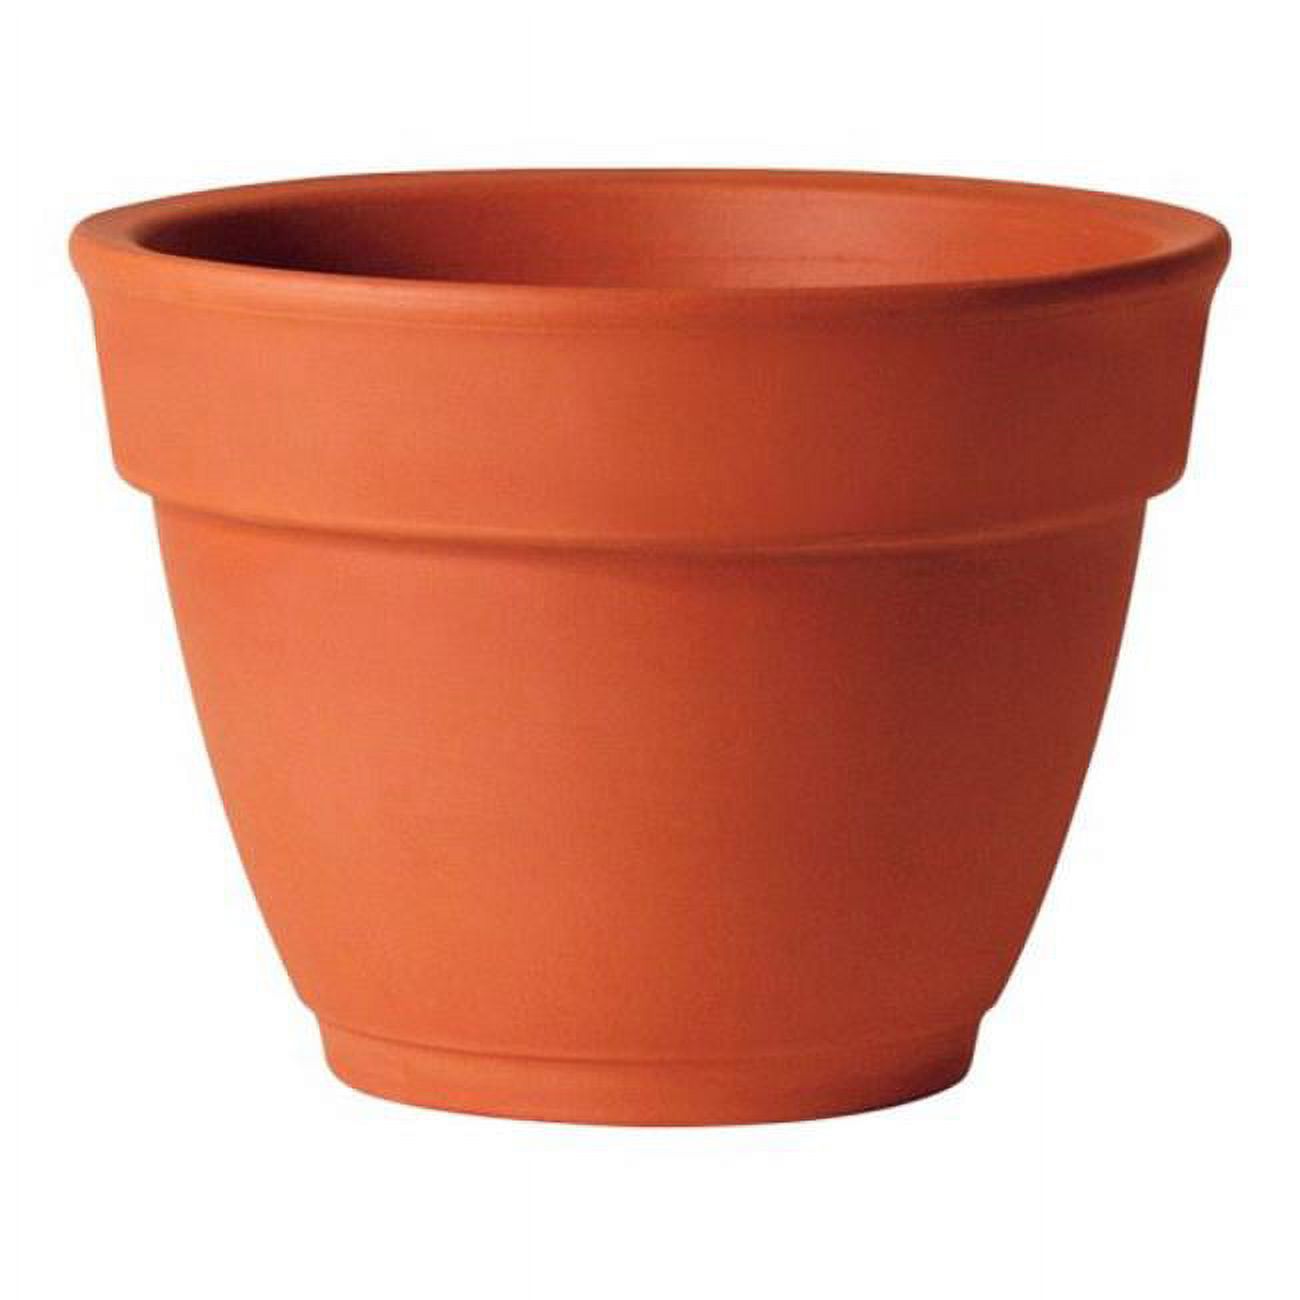 7164890 TC GARDEN BELL POT 4.3"" Deroma 3.3 in. H X 4.3 in. D Clay Planter Terracotta (Pack of 24) - image 1 of 1